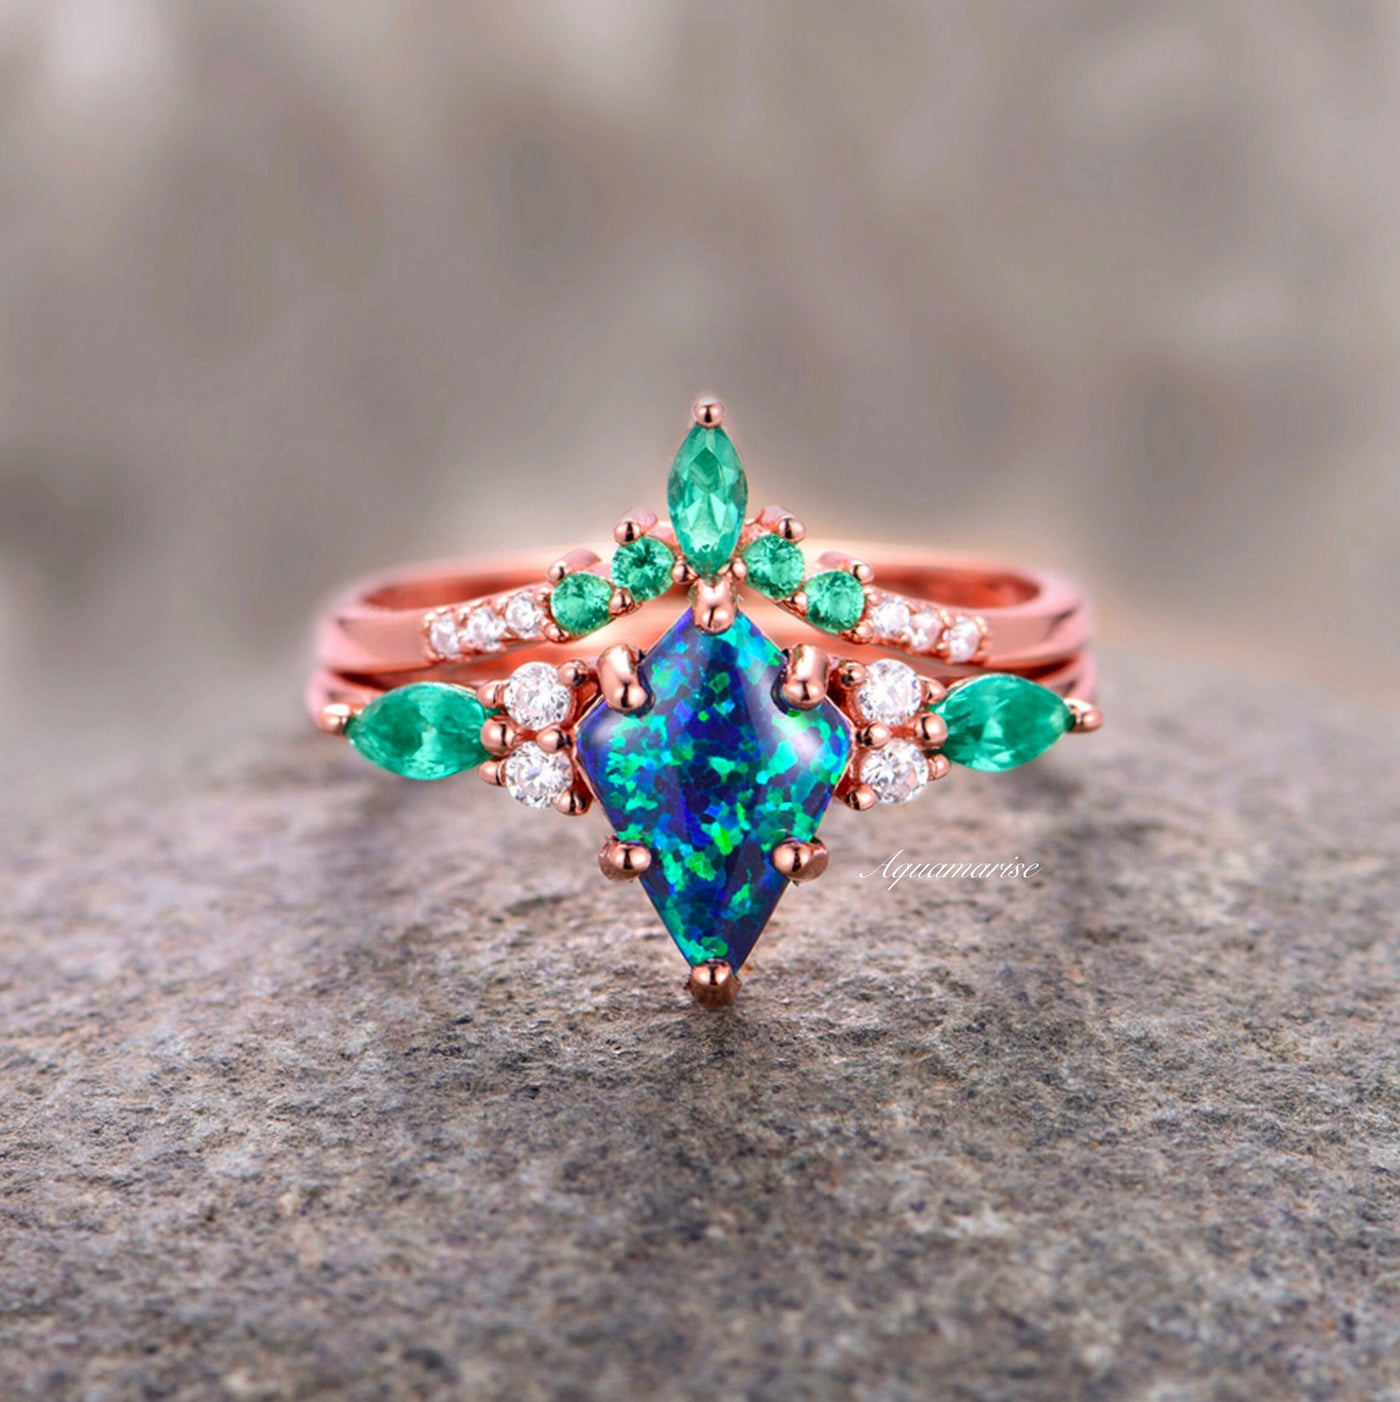 Skye Peacock Opal Couples Ring Set- His and Hers Matching Wedding Band Peacock Teal Rose Gold Vermeil & Tungsten